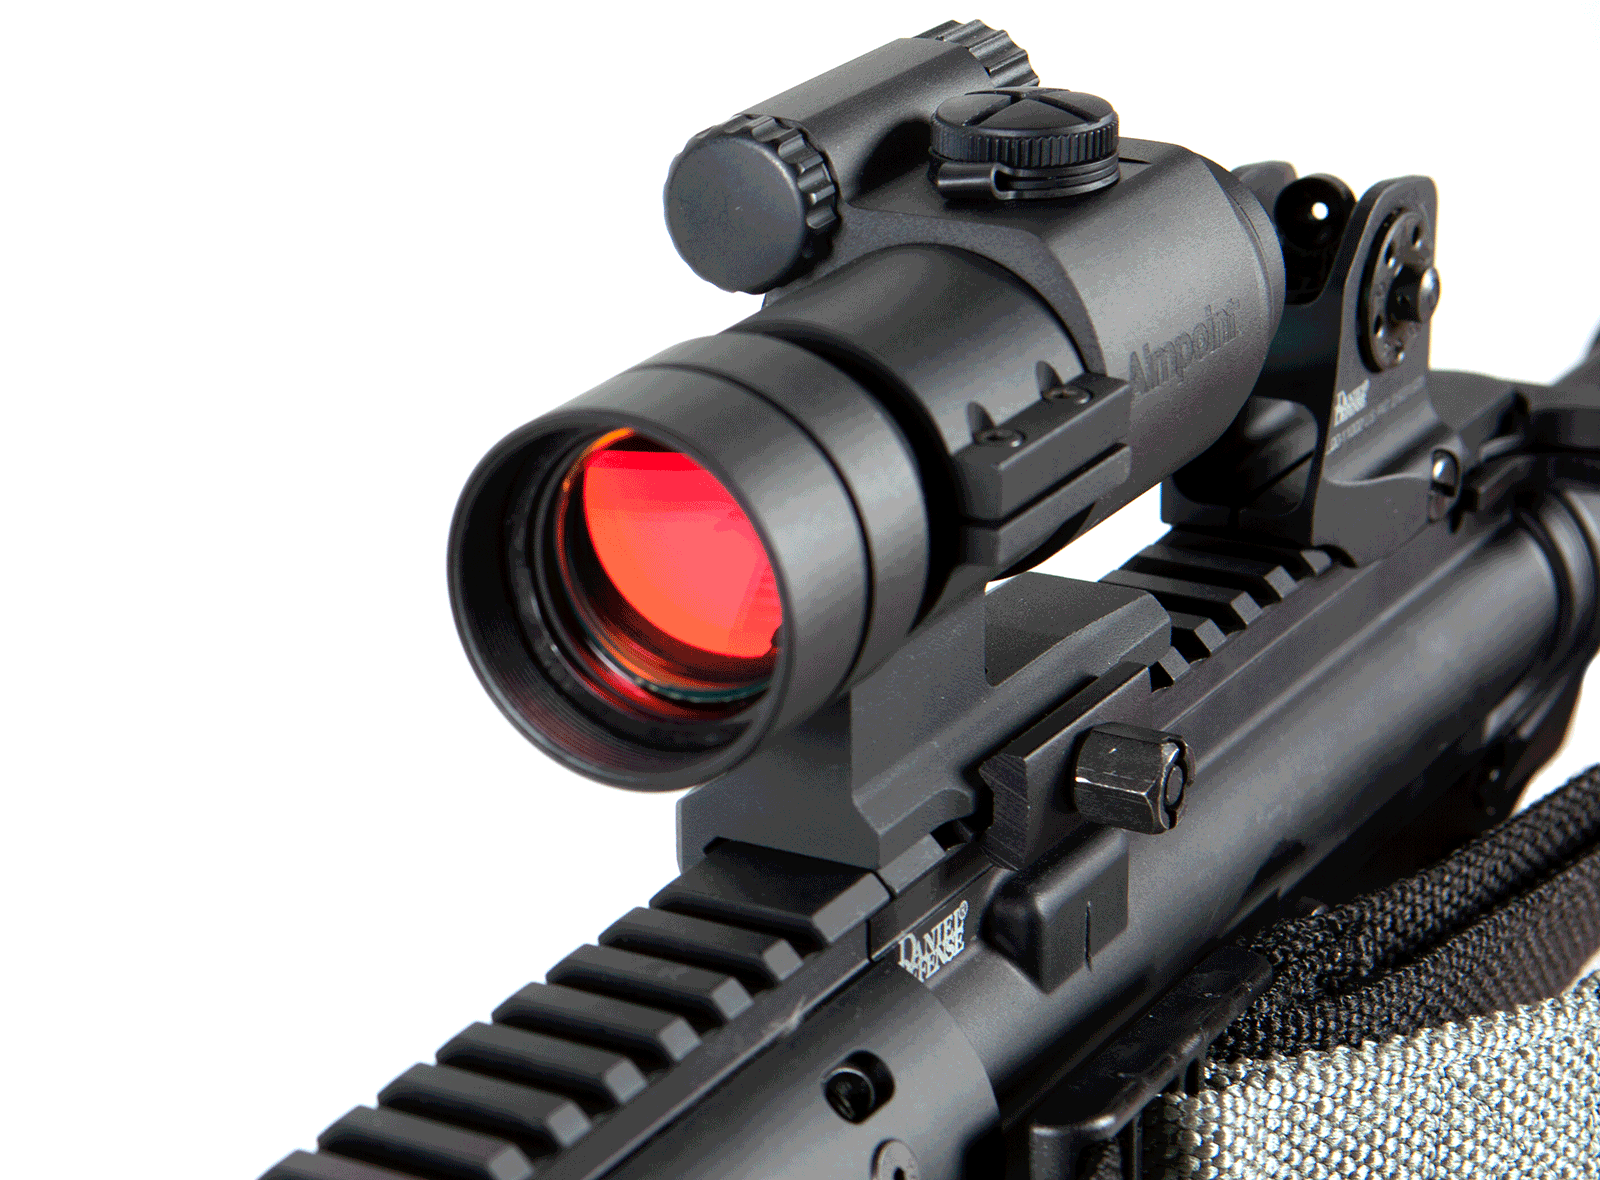 Прицелы aimpoint. Aimpoint Carbine Optic. Прицел Red Dot ar15. Aimpoint compm2 Reflex Optic. Aimpoint 5000.